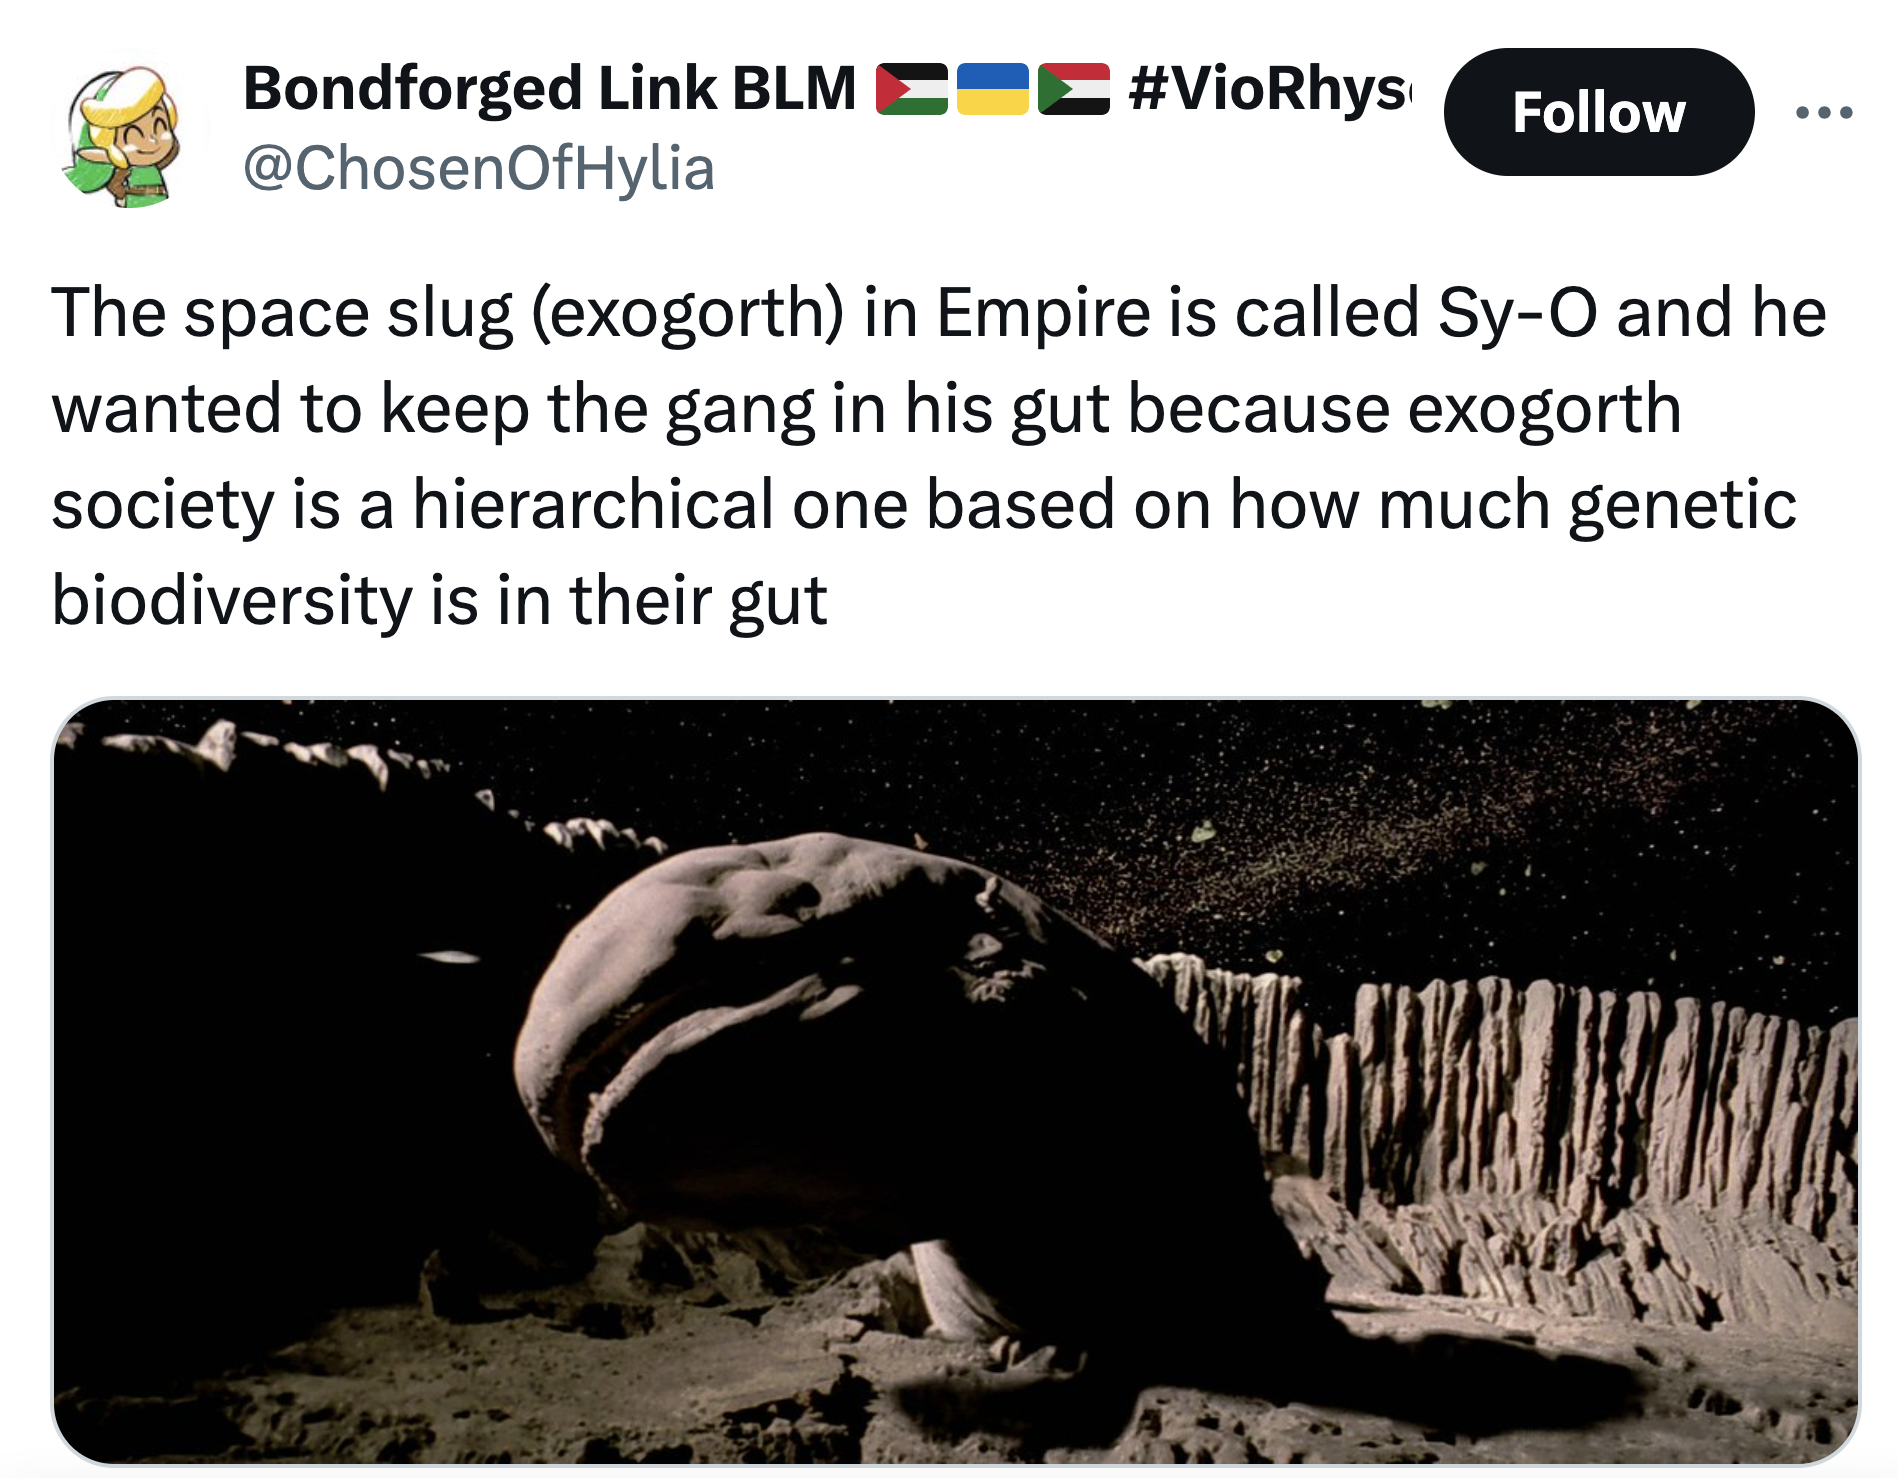 empire strikes back asteroid monster - Bondforged Link Blm The space slug exogorth in Empire is called SyO and he wanted to keep the gang in his gut because exogorth society is a hierarchical one based on how much genetic biodiversity is in their gut